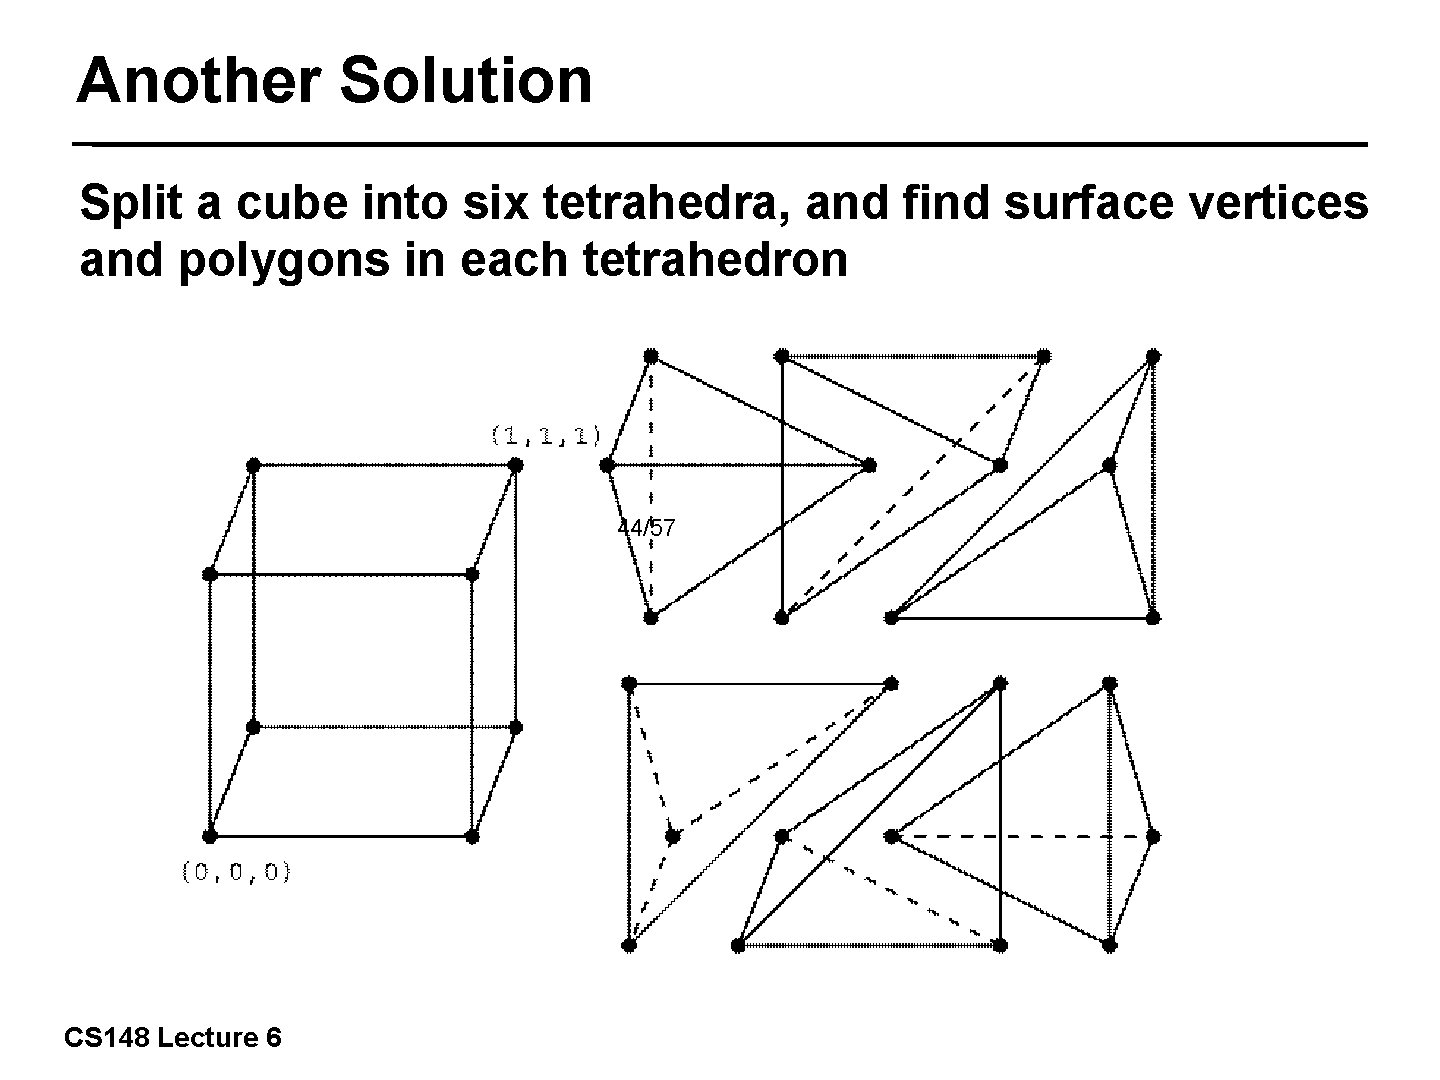 Another Solution Split a cube into six tetrahedra, and find surface vertices and polygons